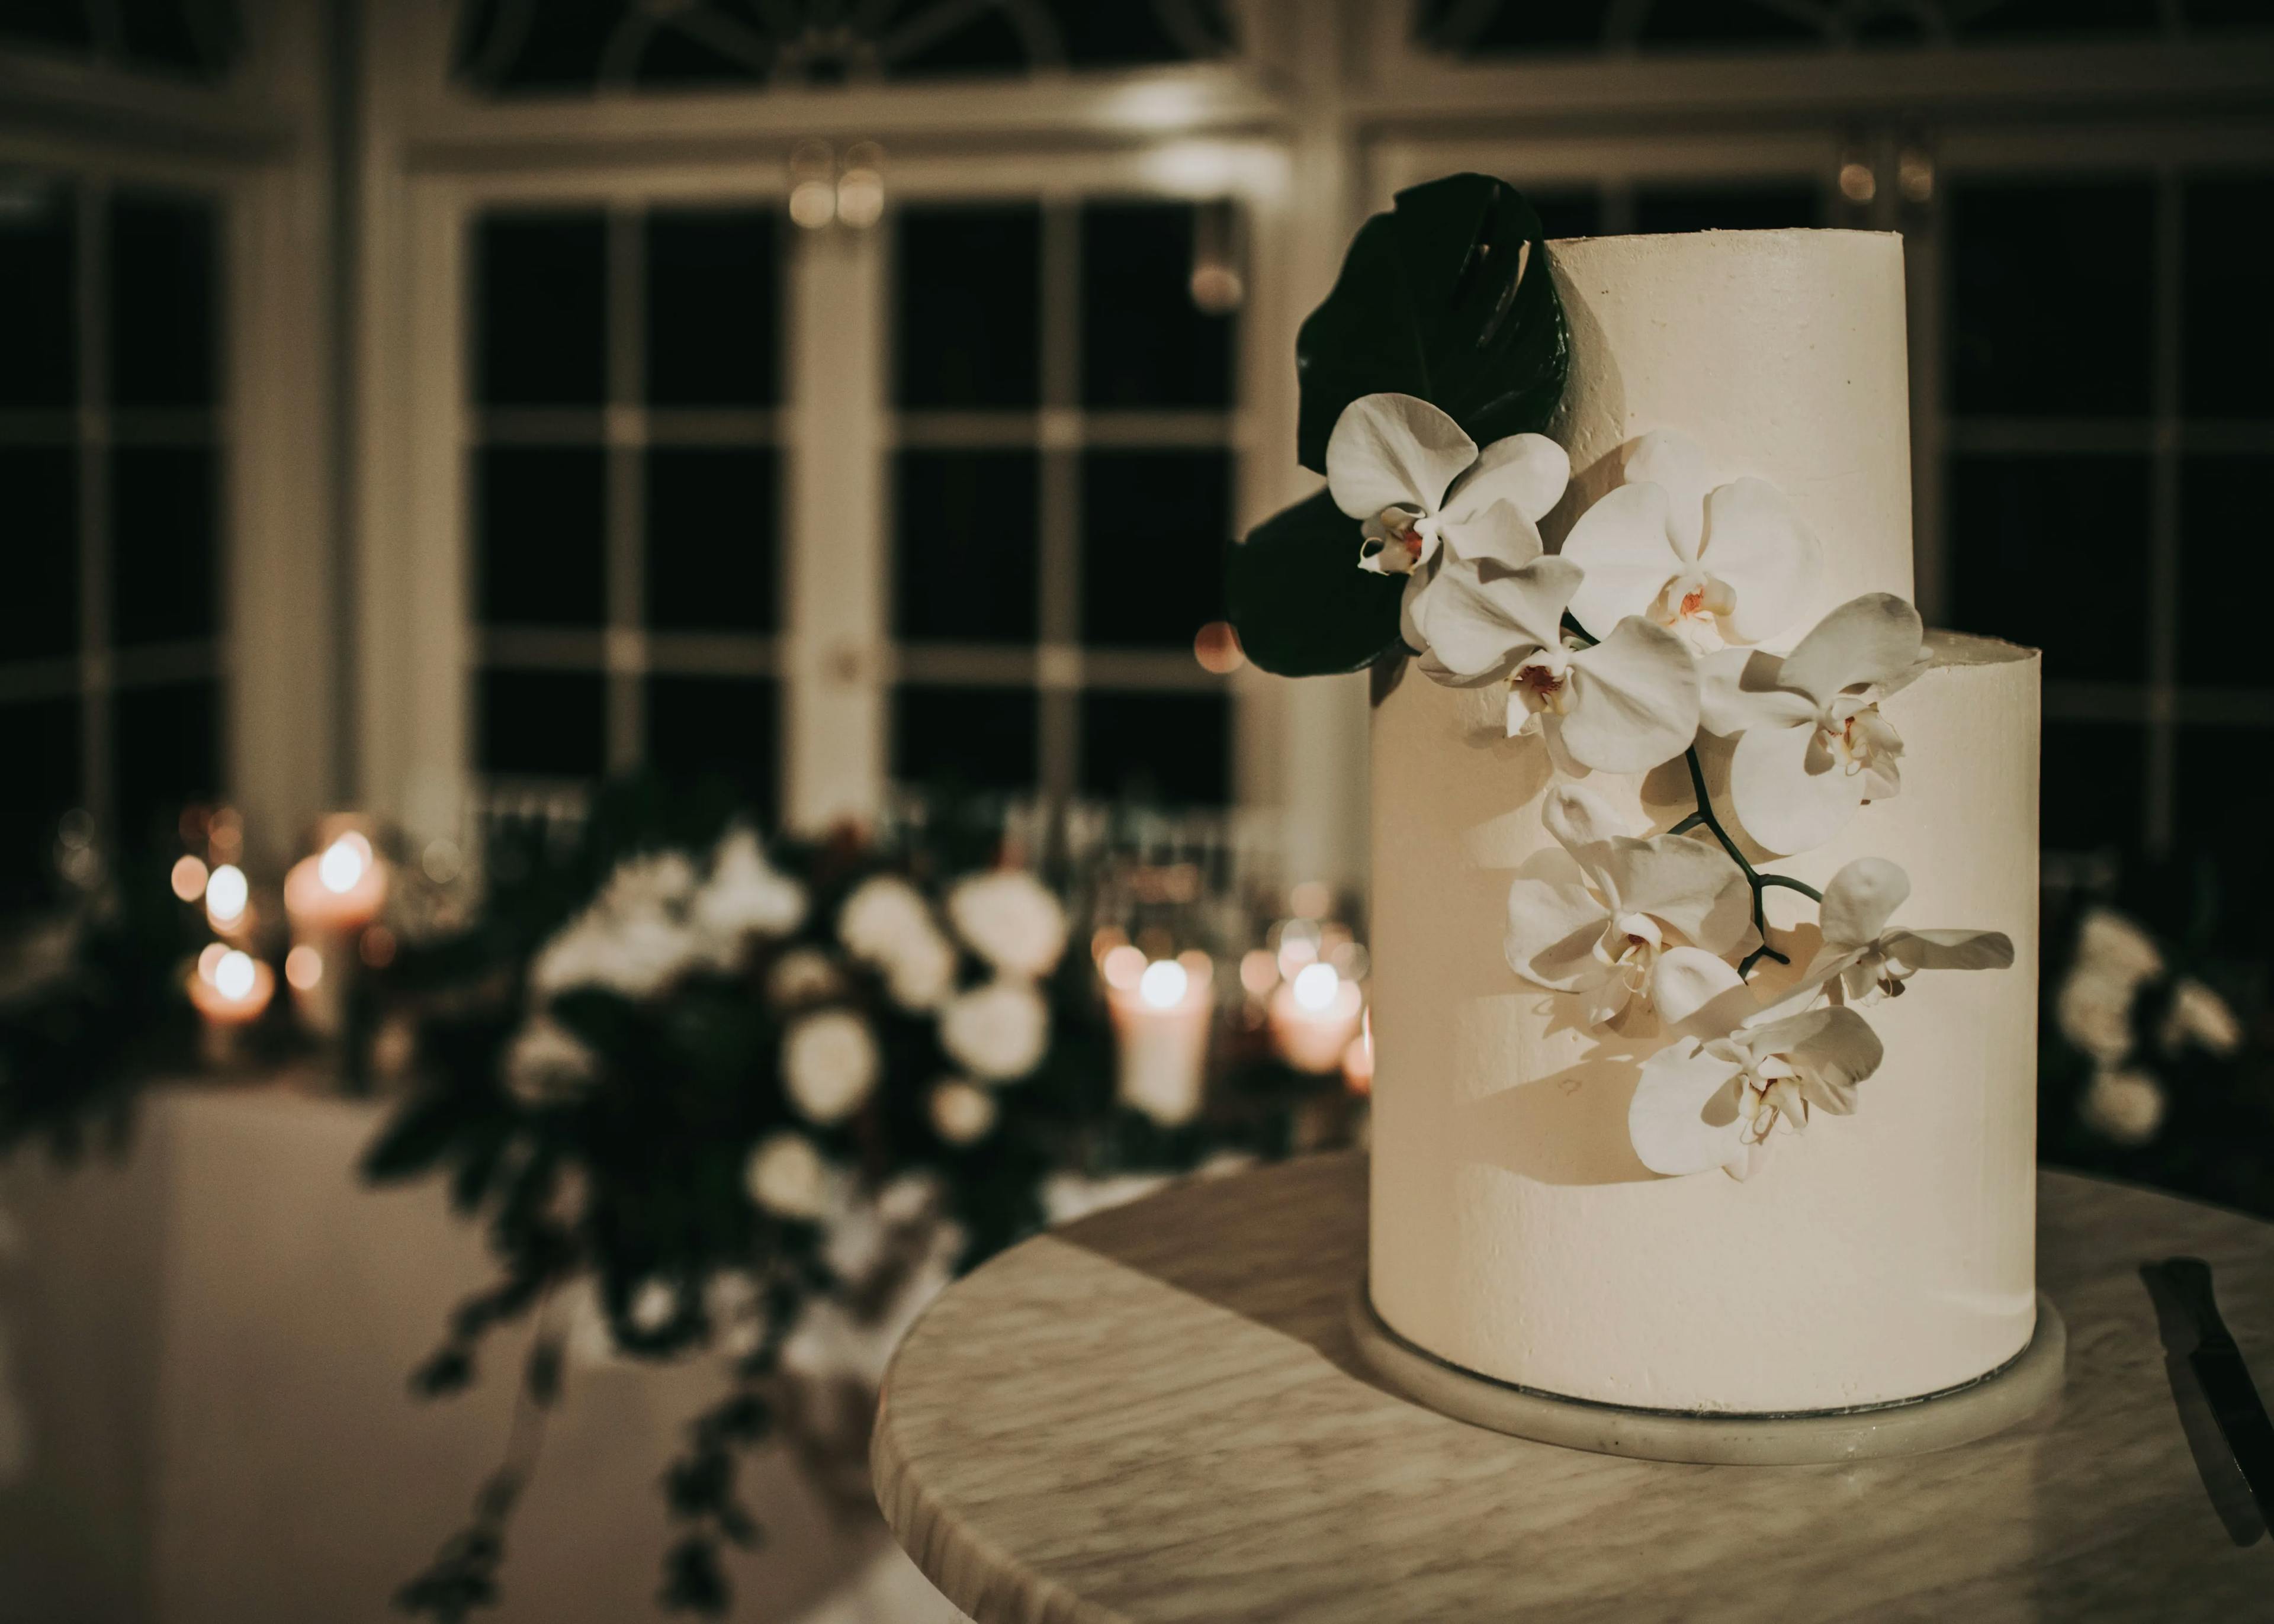 A white, two-tiered cake adorned with white flowers and green leaves sits on a round table. The cake is in front of a window with curved panes, and the background features a dimly-lit room with candles and floral arrangements.